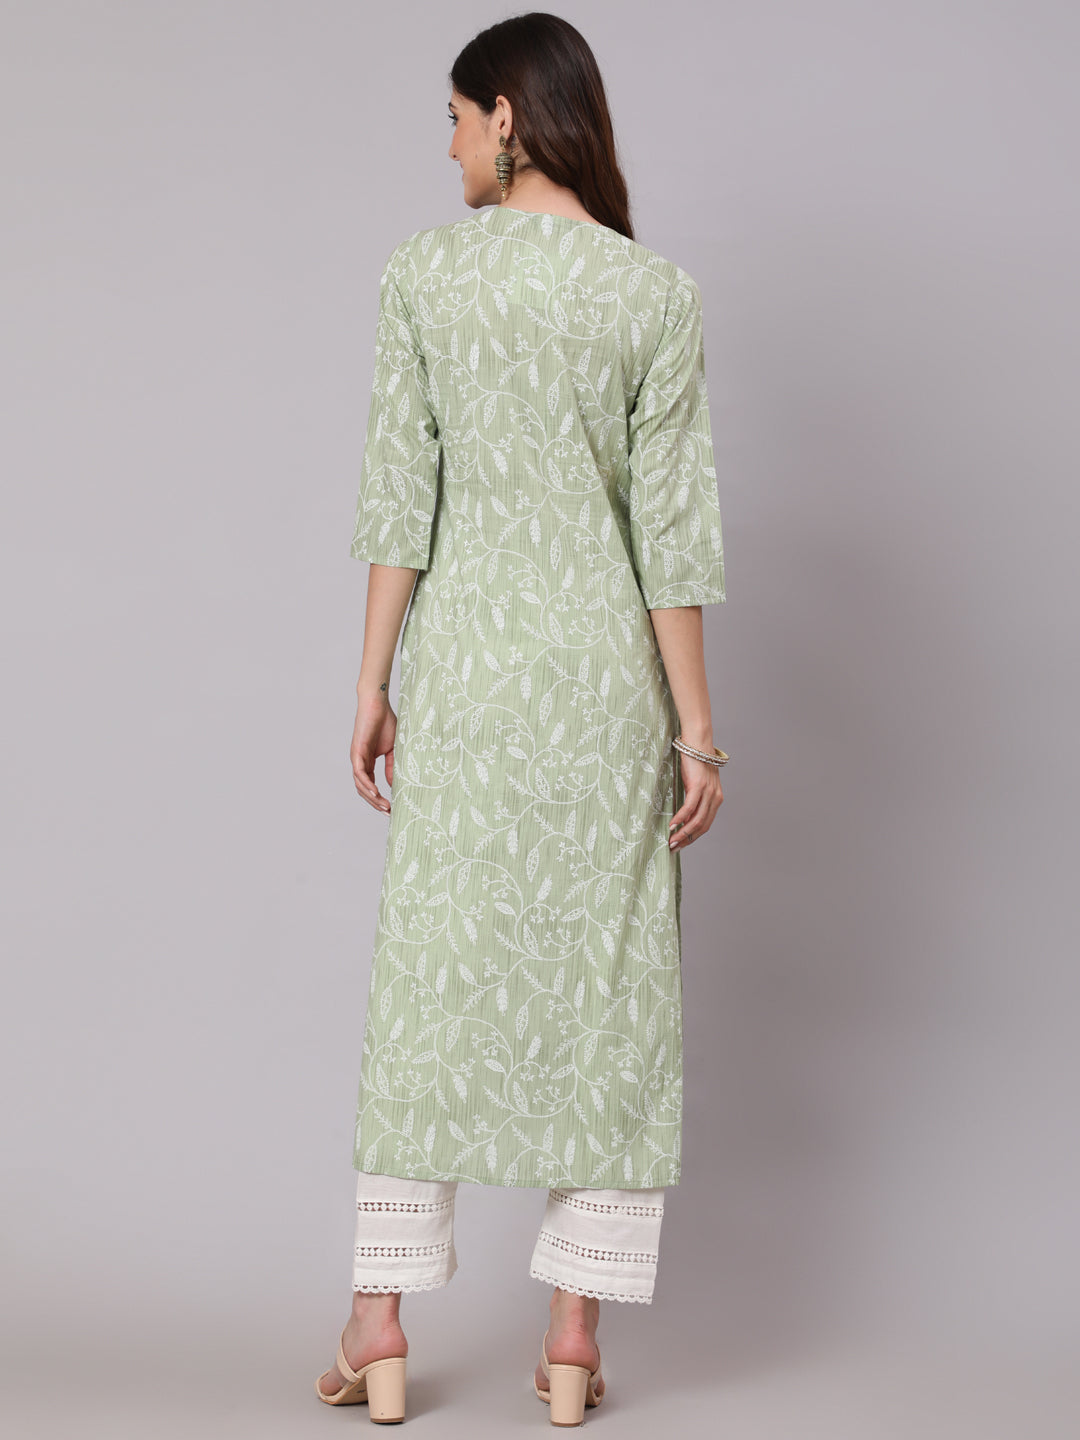 Women's Green Printed Straight Kurta and White Solid Palazzo With Lace Detail - Taantav